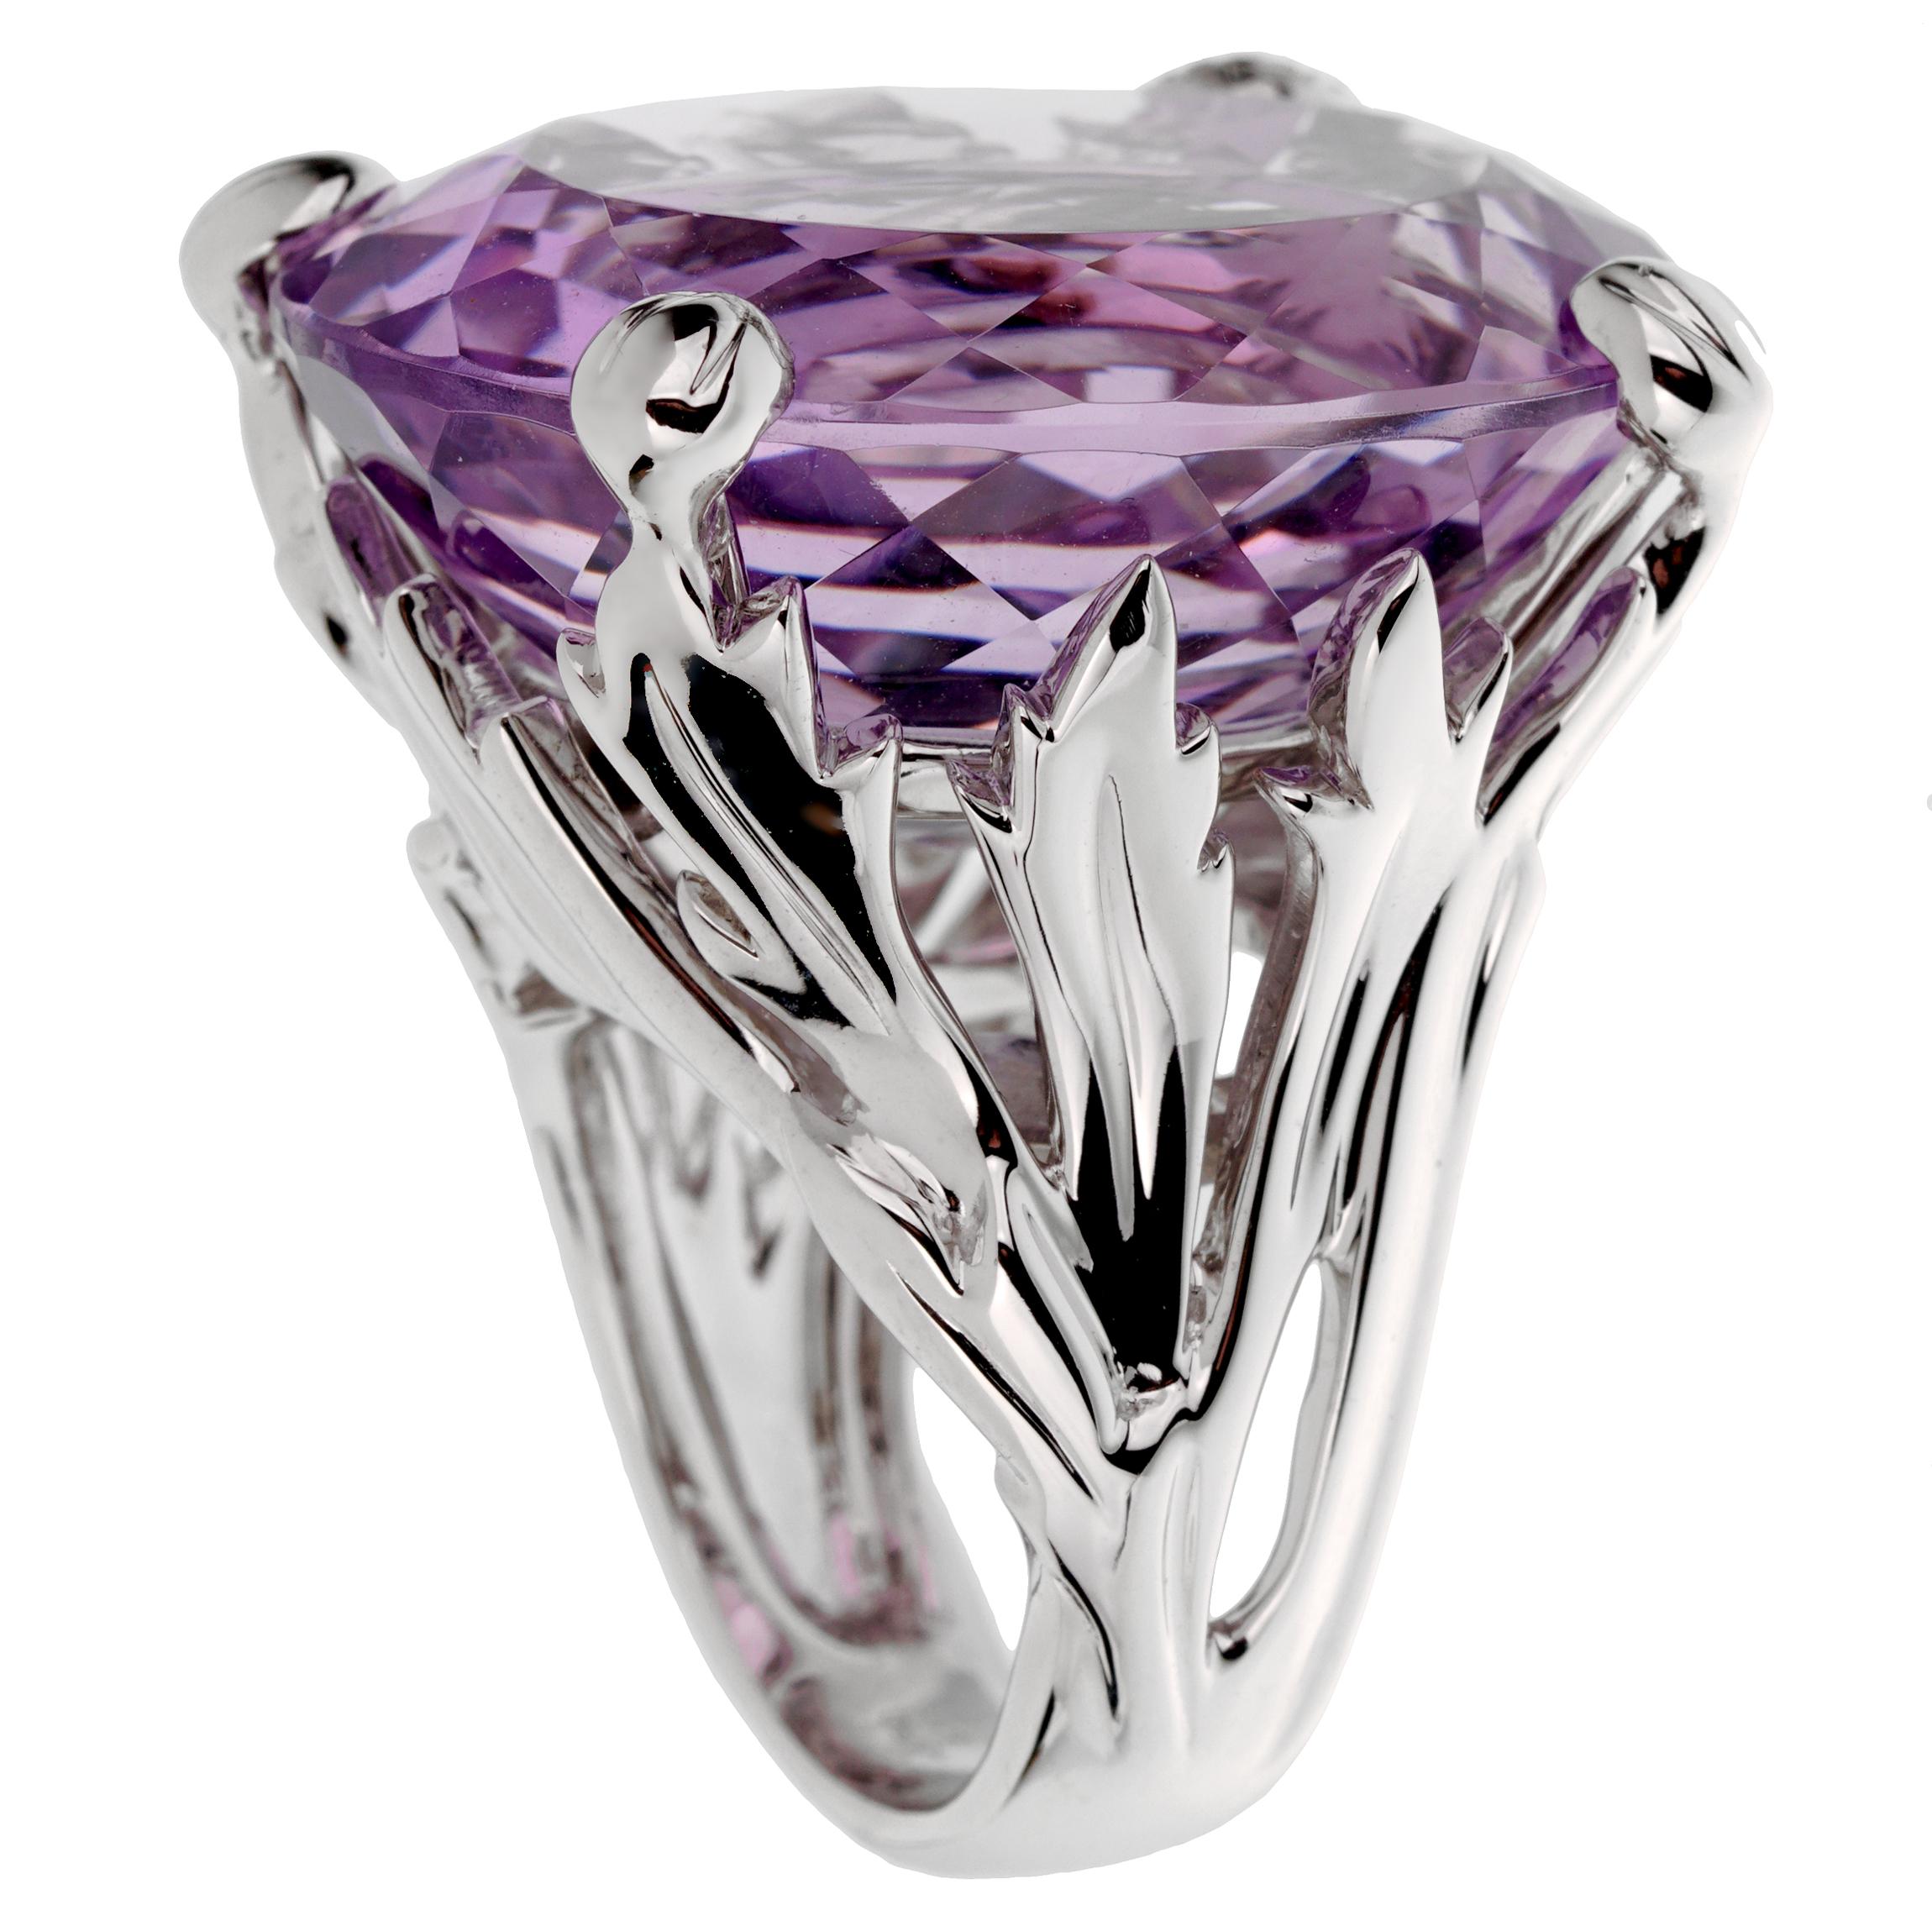 An incredible Christian Dior cocktail ring showcasing a 44.5ct oval amethyst adorned by .12ct of the finest round brilliant cut diamonds in 18k white gold. Euro Size 57

Sku: 2782